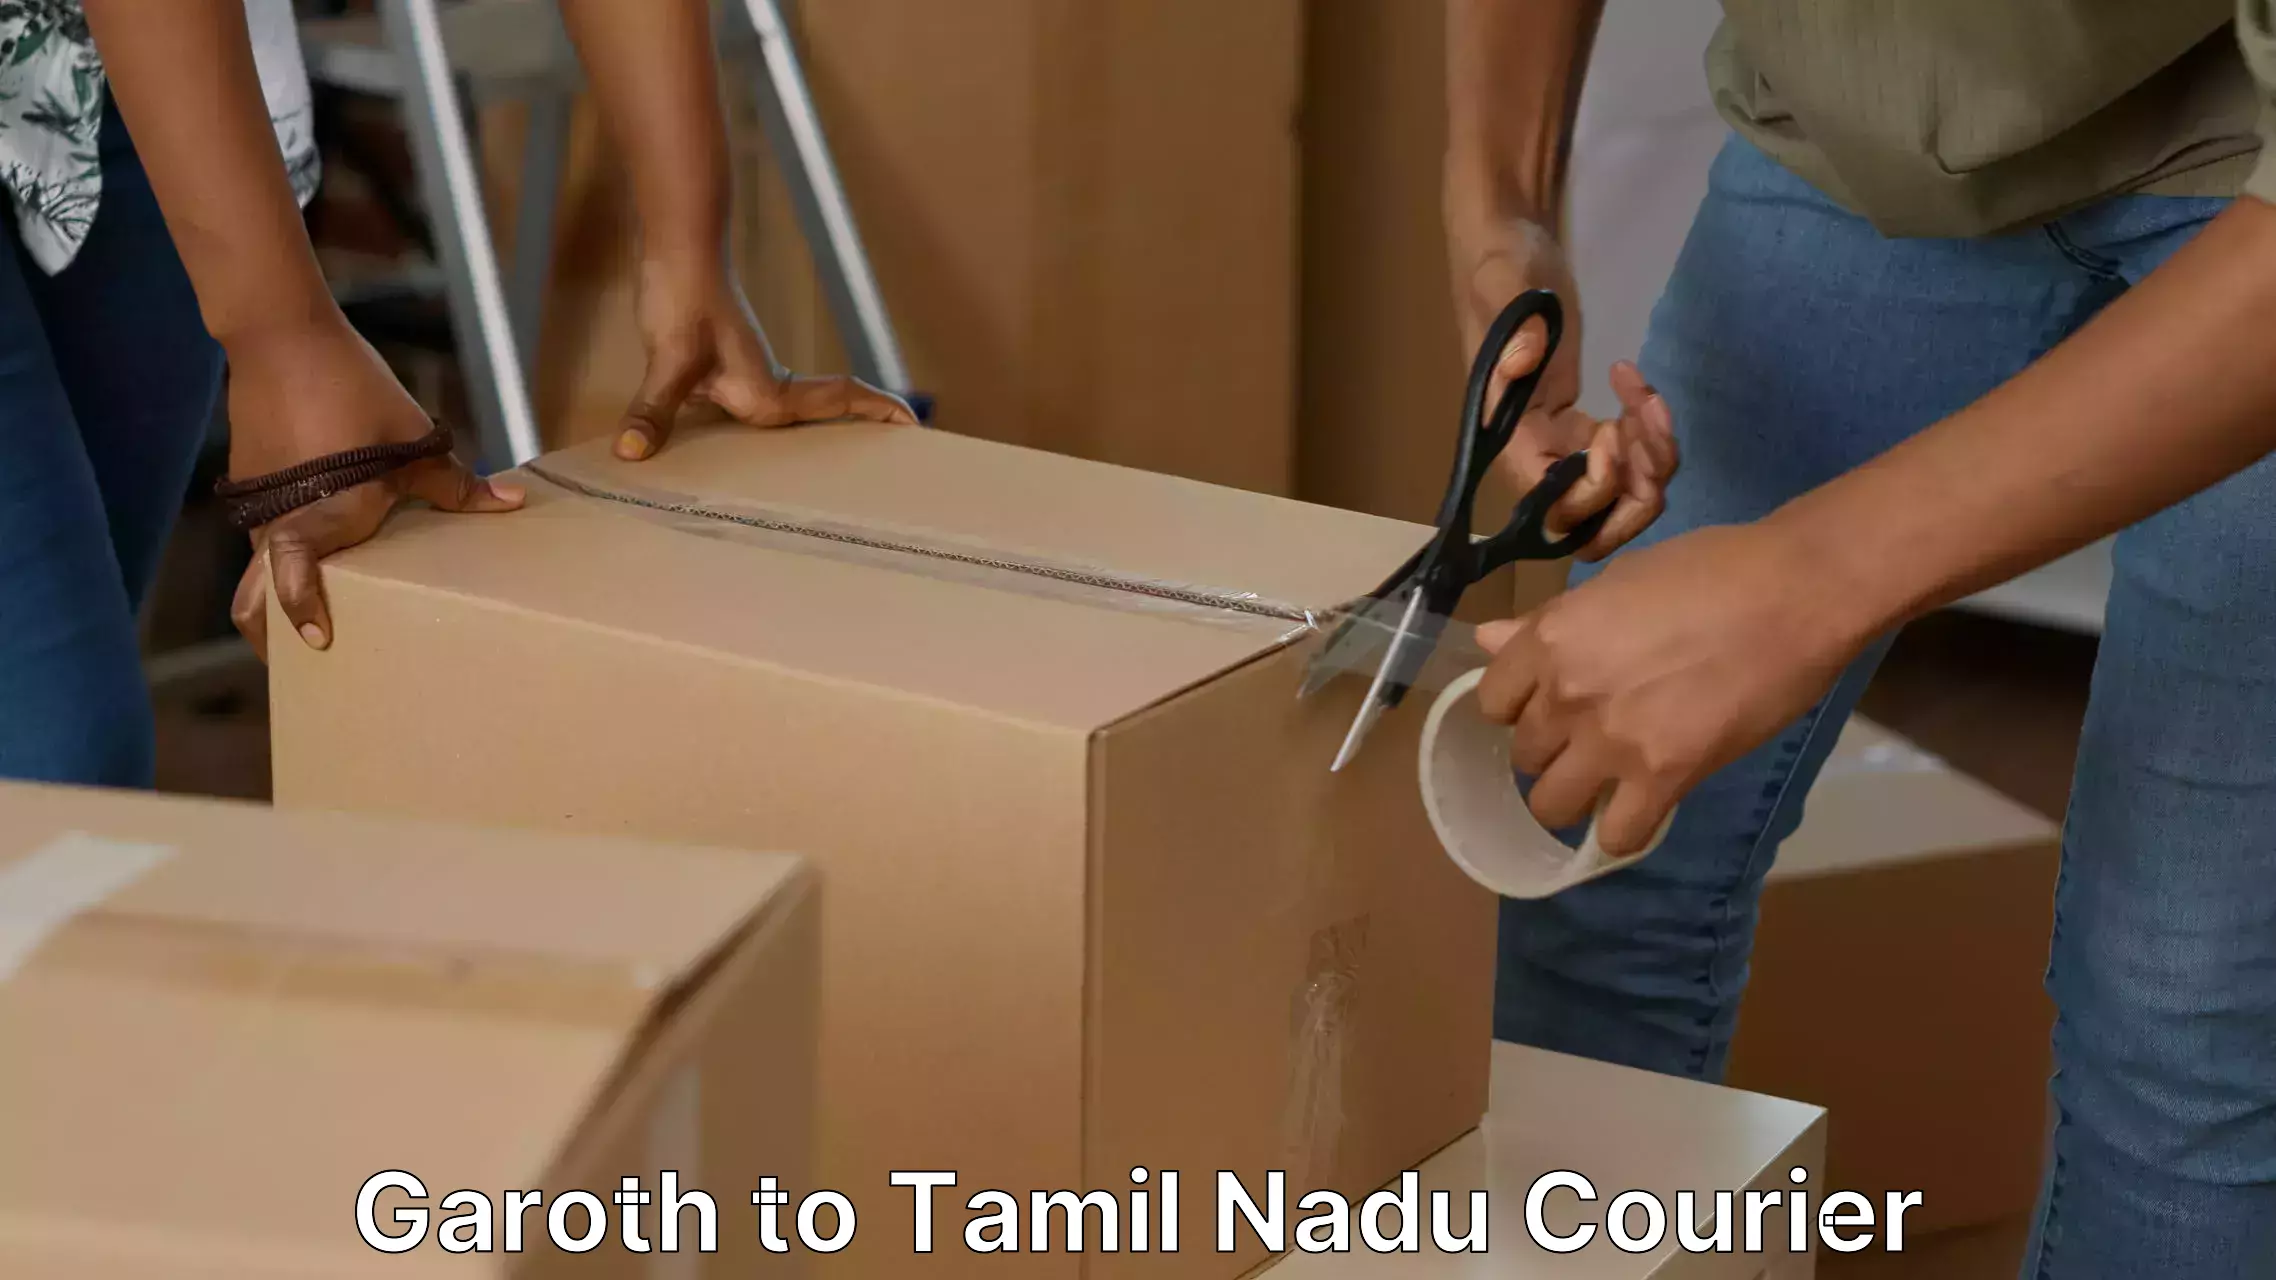 Efficient packing and moving Garoth to Tamil Nadu